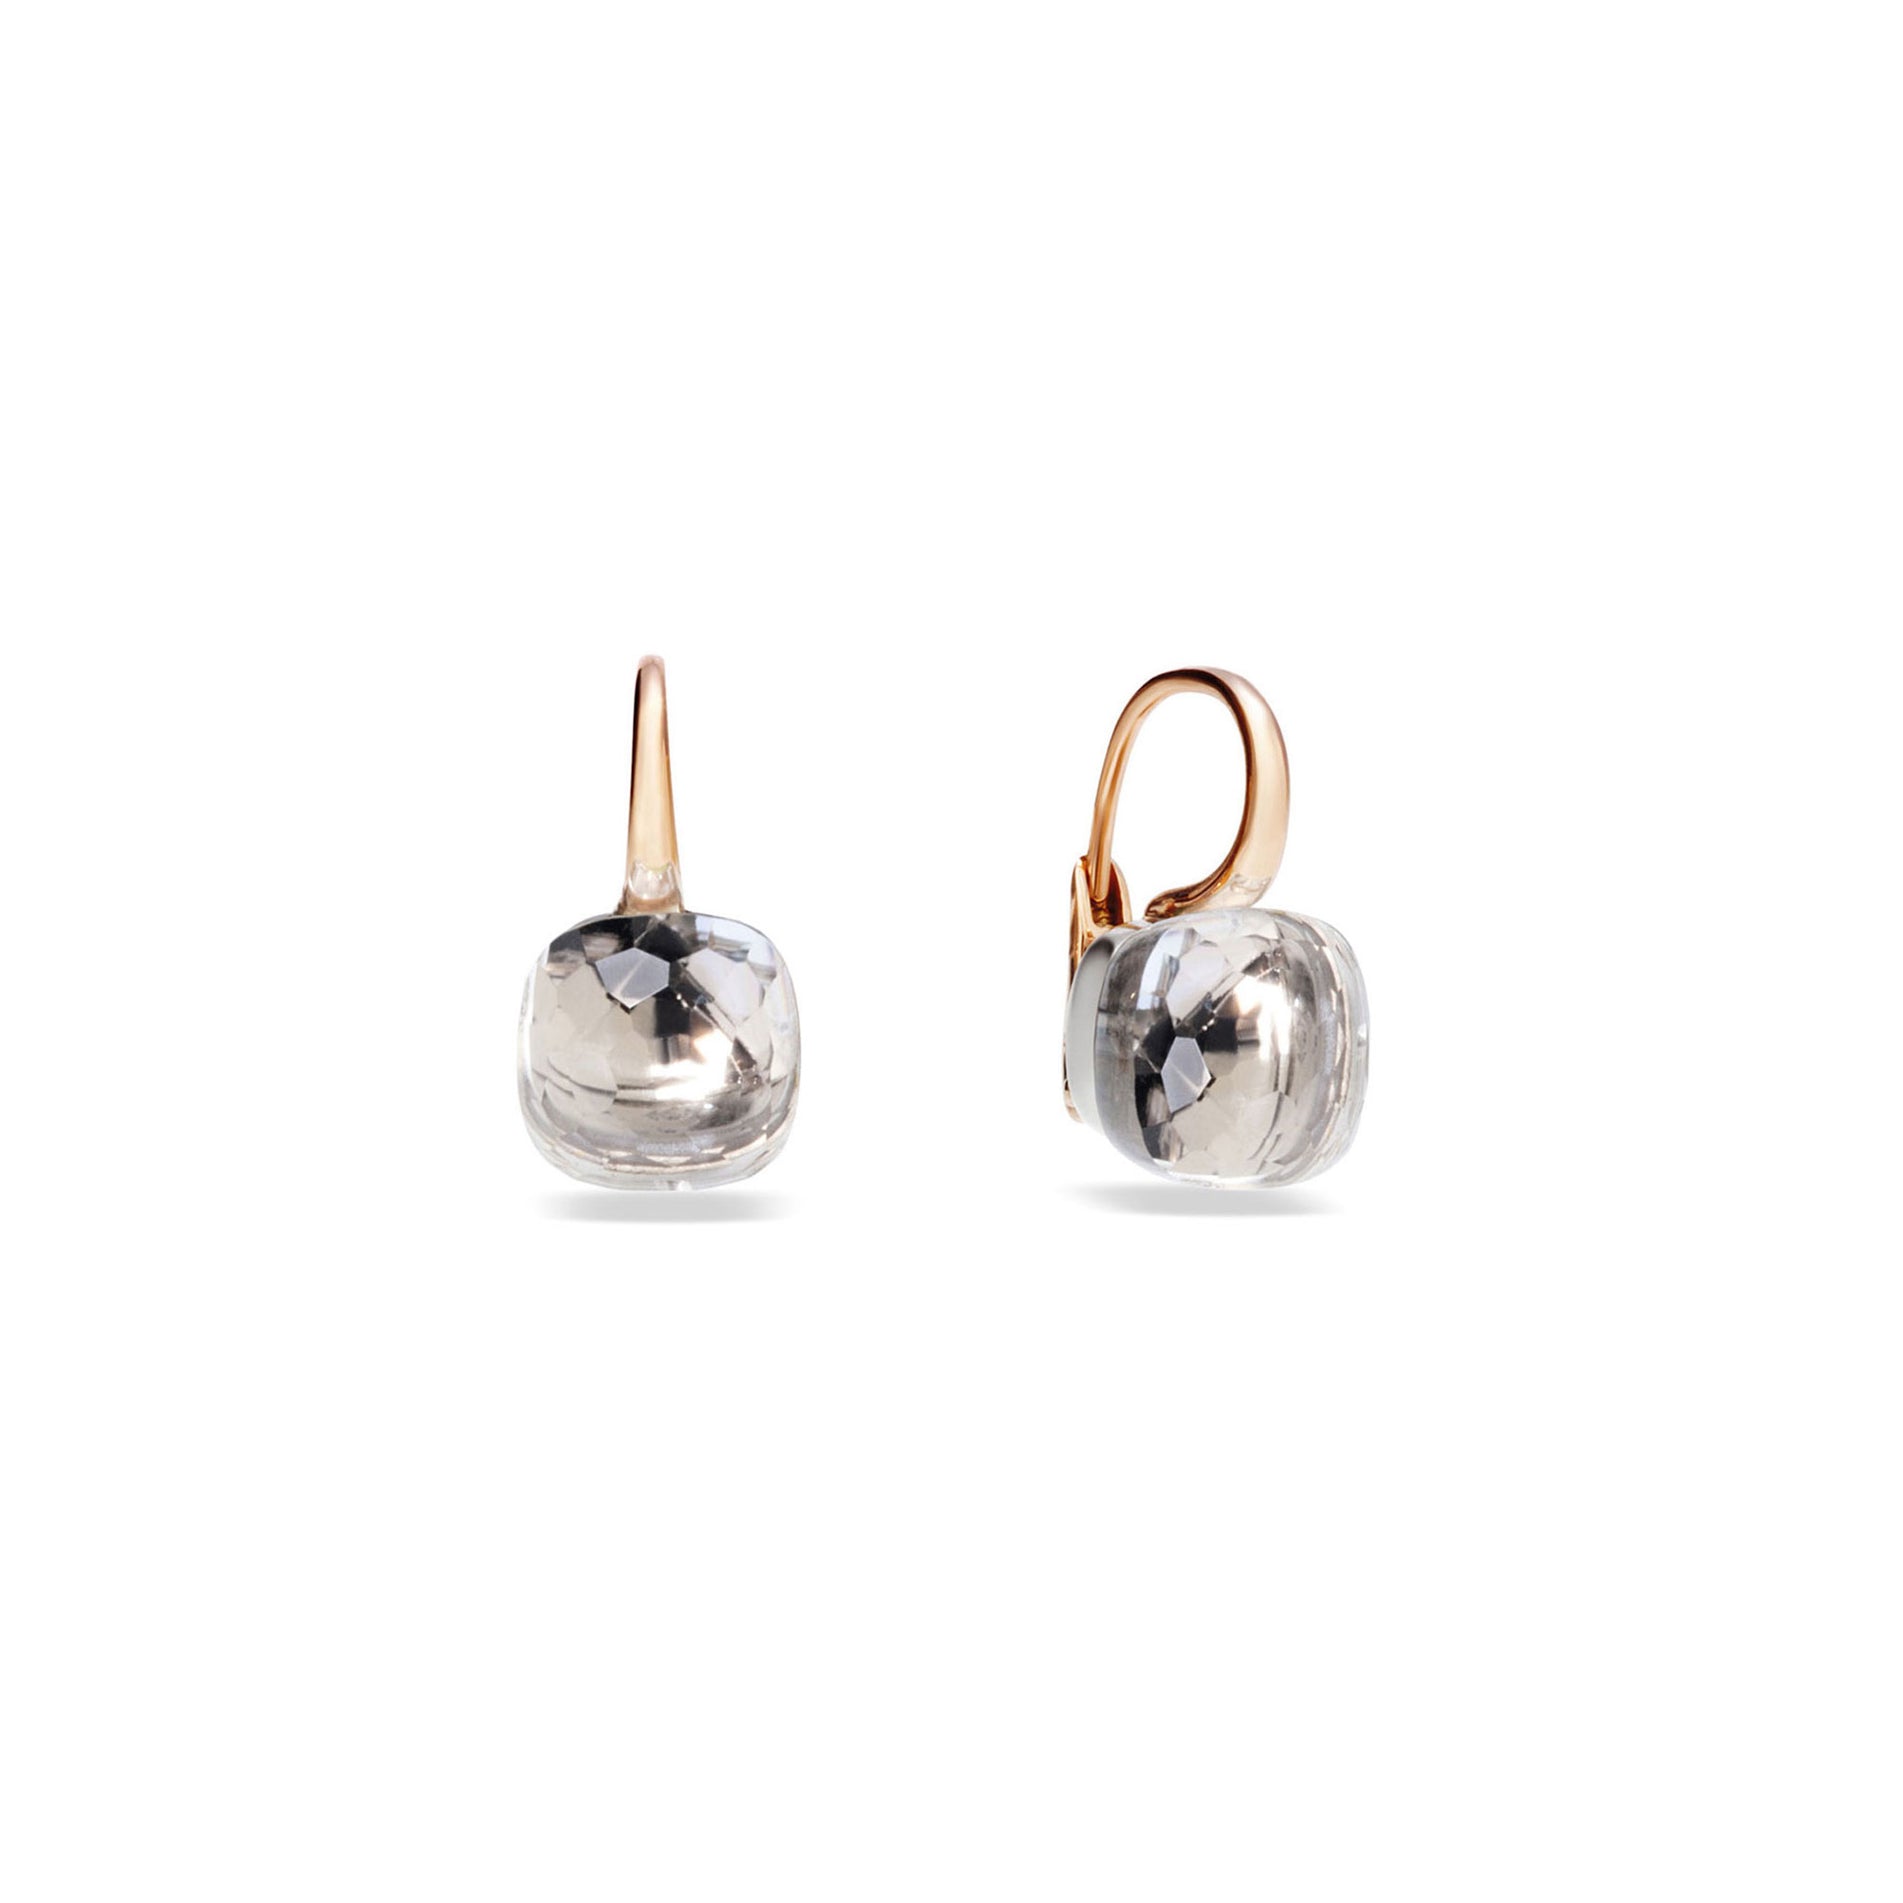 Nudo Classic Earrings in 18k Rose and White Gold with White Topaz - Orsini Jewellers NZ